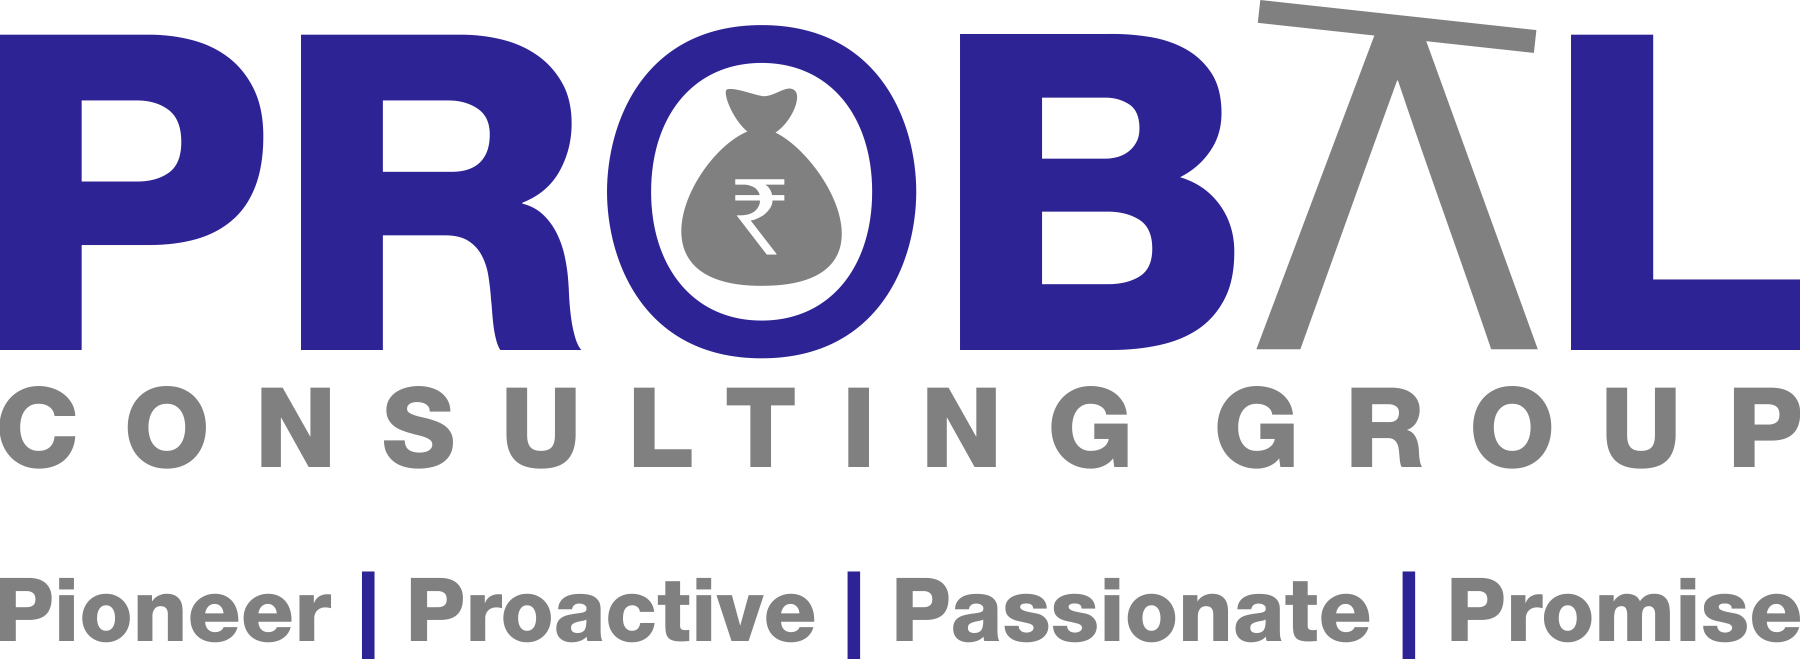 Probal Consulting Group